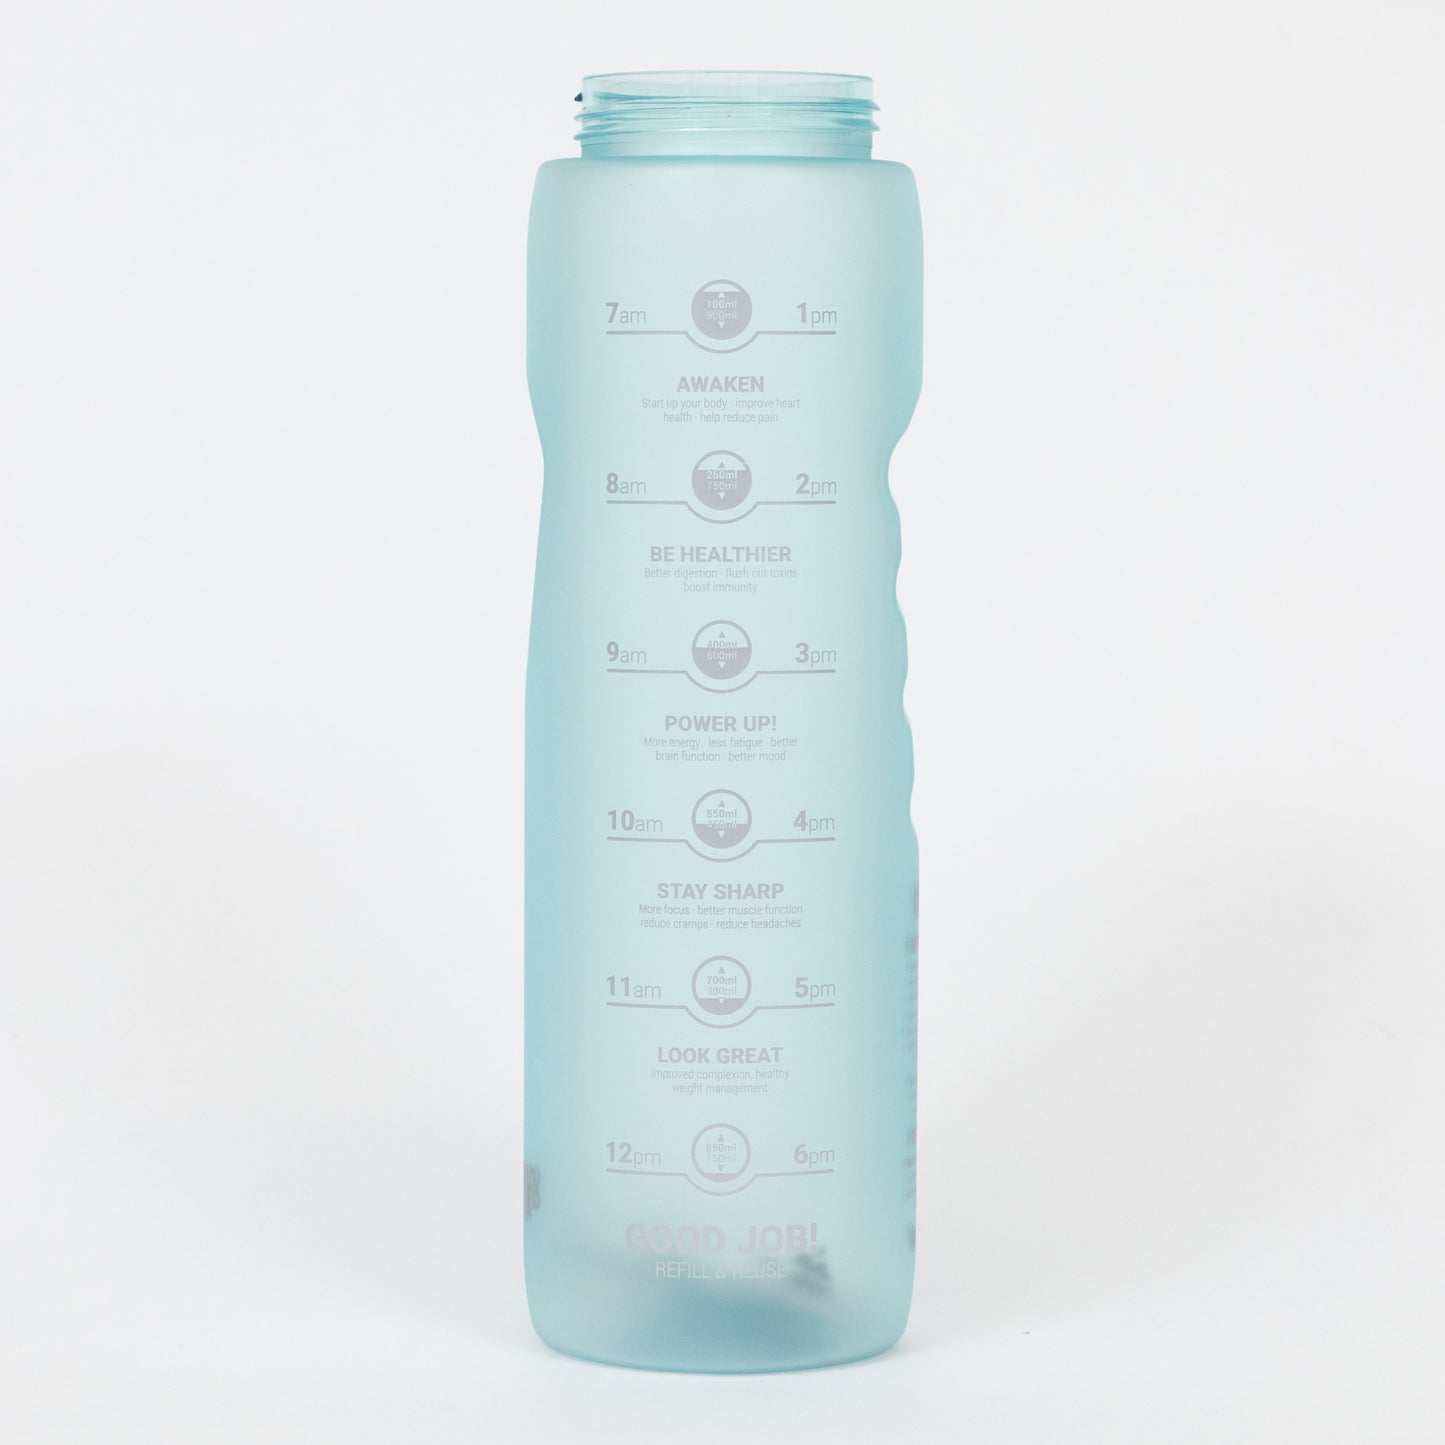 Ion8 Leak Proof 1 Litre Sports Water Bottle (with times to drink) in BLUE